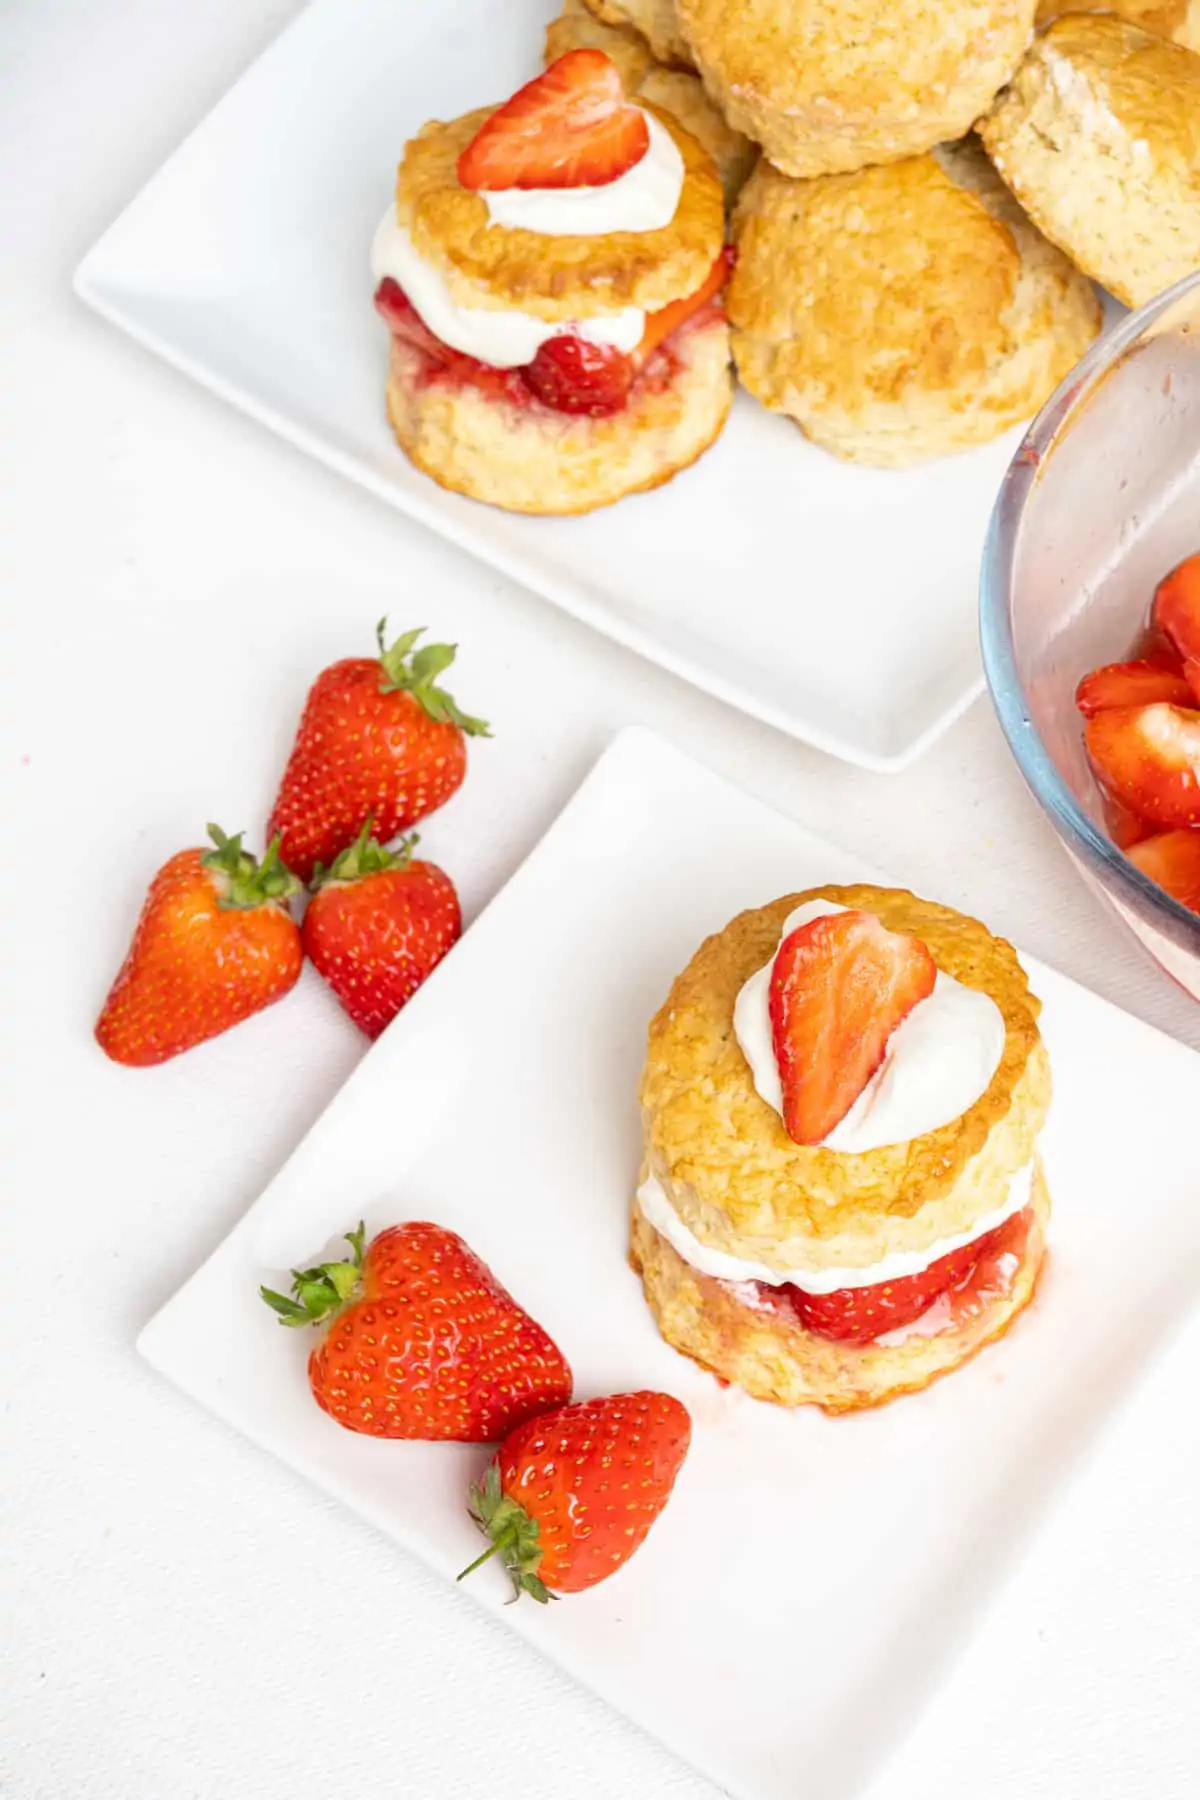 A tall biscuit with a cream and strawberry filling and topping served on a plate with fresh strawberries. More shortcakes on a serving platter in the back.